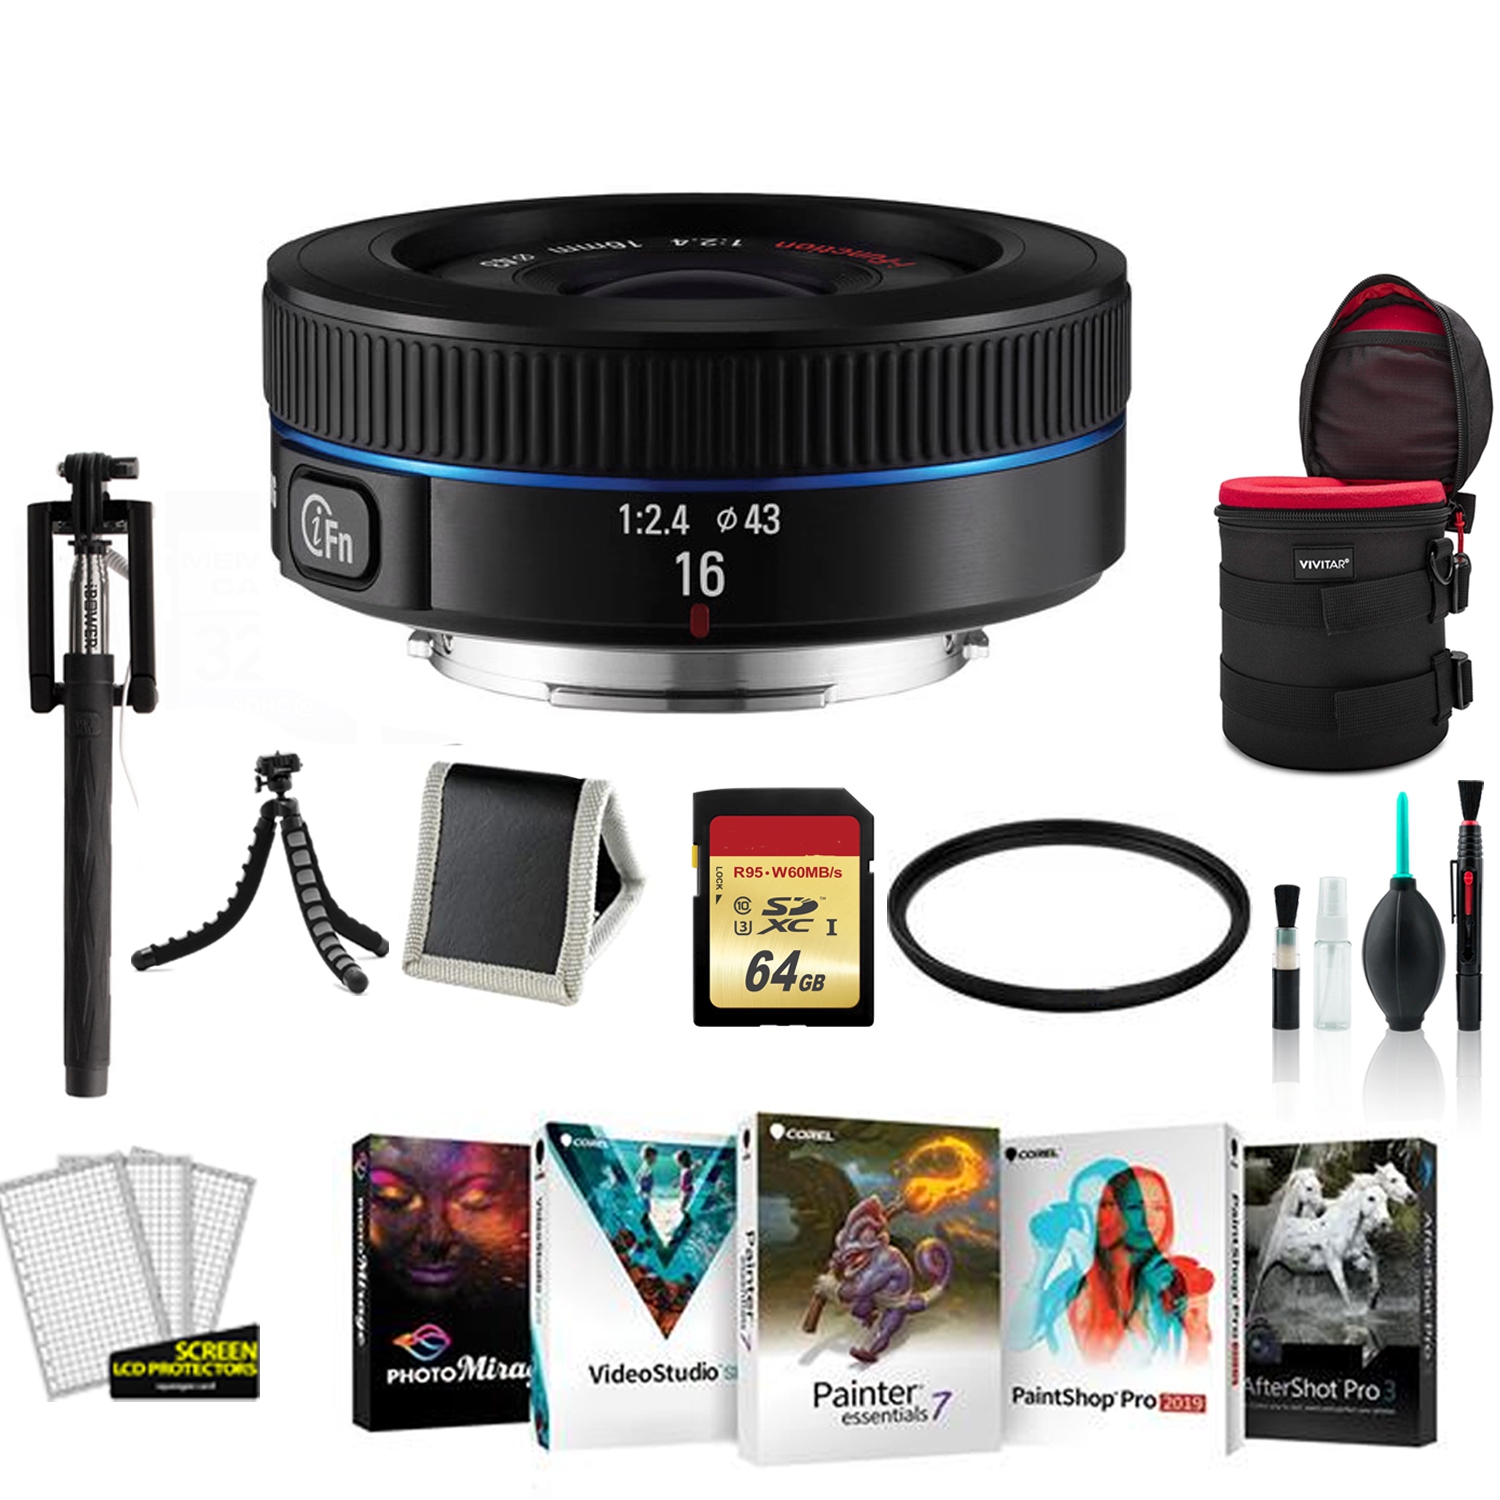 Samsung 16mm F/2.4 Wide Lens for Samsung NX Cameras - Kit with 64GB Memory Card